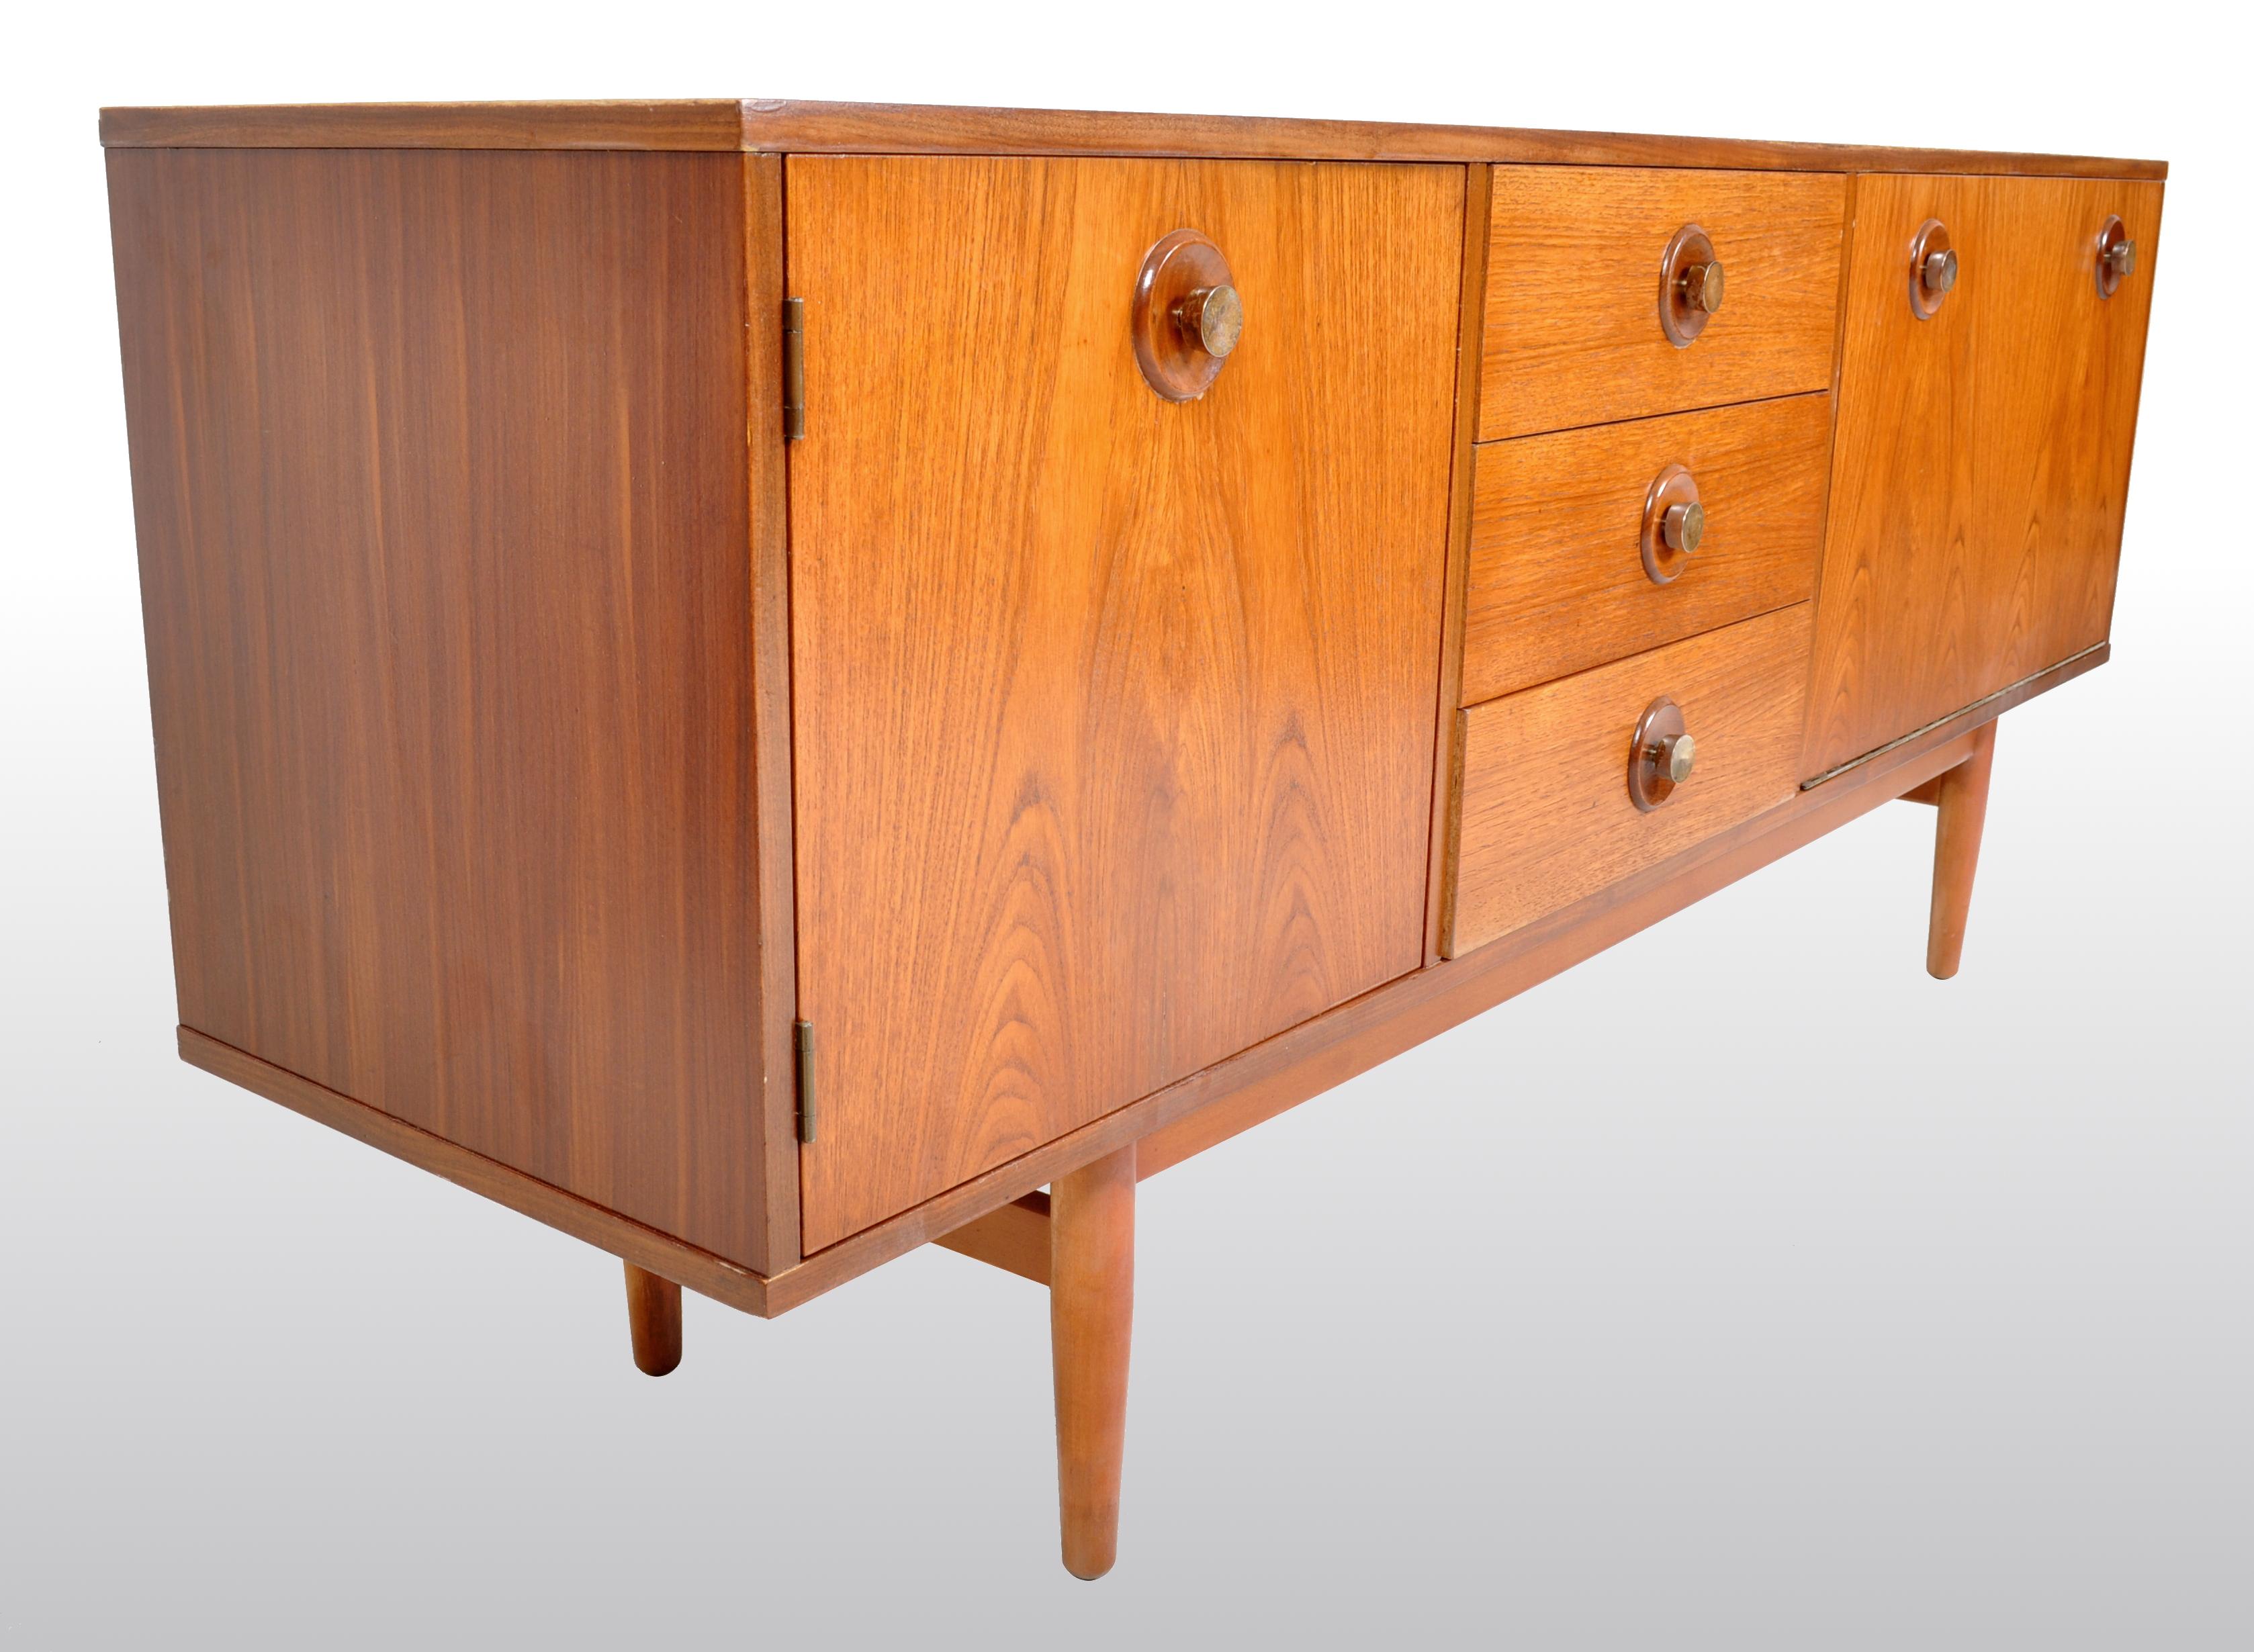 Mid-Century Modern Danish credenza / sideboard in teak, 1960s. The credenza having a cupboard door to the left side with a central bank of three drawers flanked by a large fall-front door enclosing two sections, one with a sliding tray. The credenza